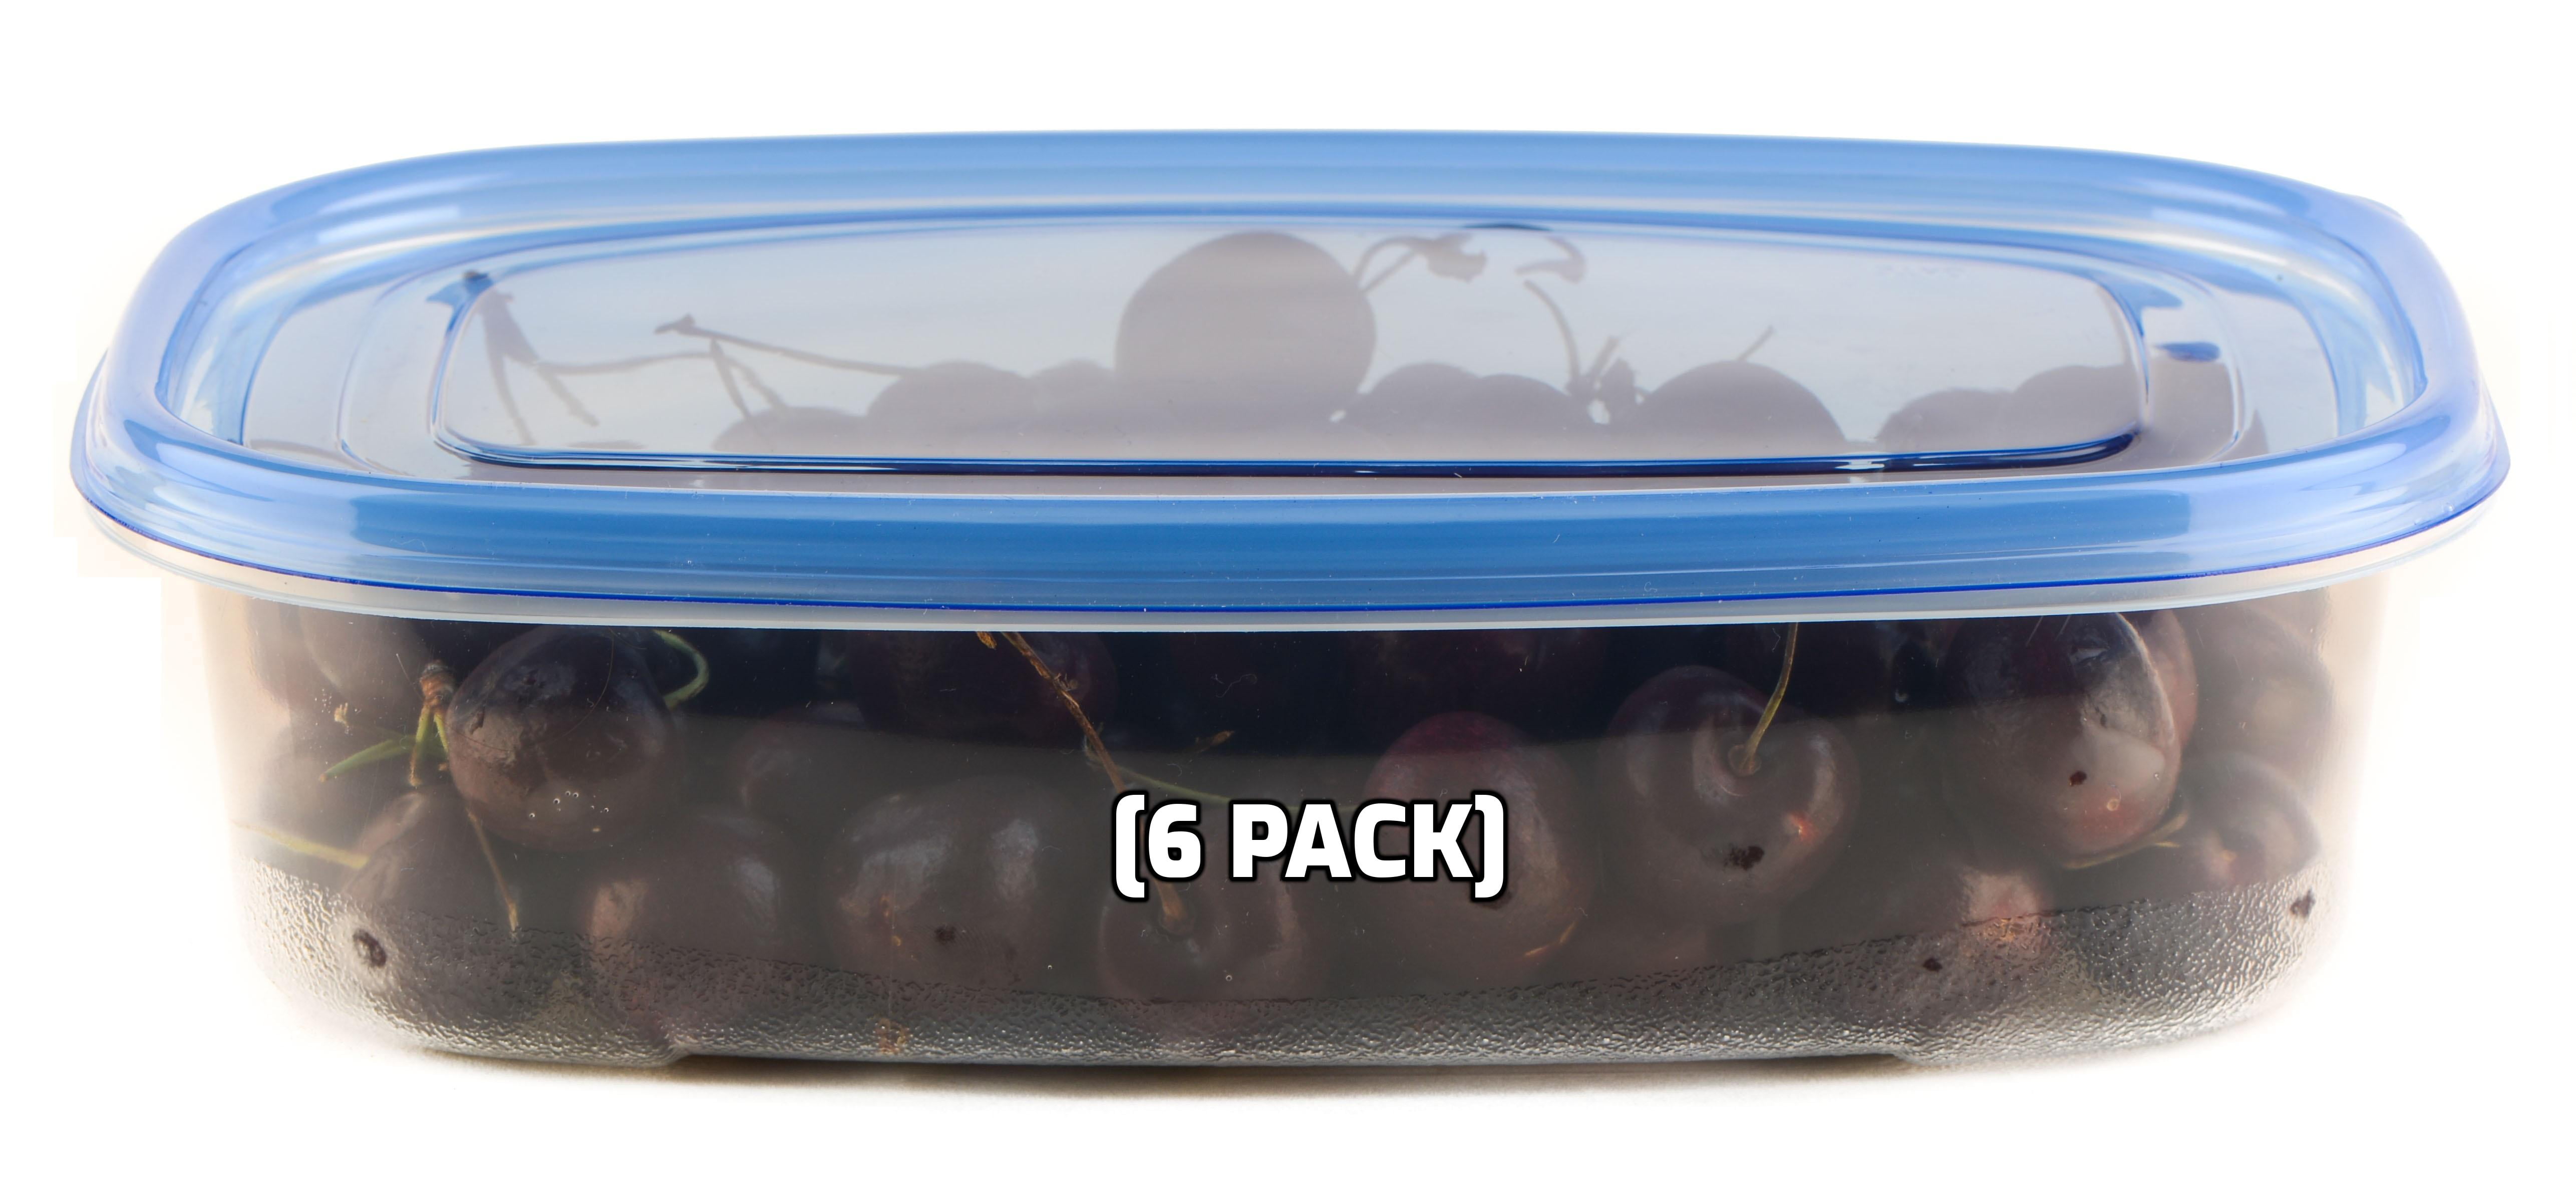  Meal Prep Containers, 50Pack [38OZ] Food Storage Containers  With Lids, Reusable Food Prep Containers, To Go Containers, BPA-free,  Stackable, Microwave/Dishwasher/Freezer Safe: Home & Kitchen